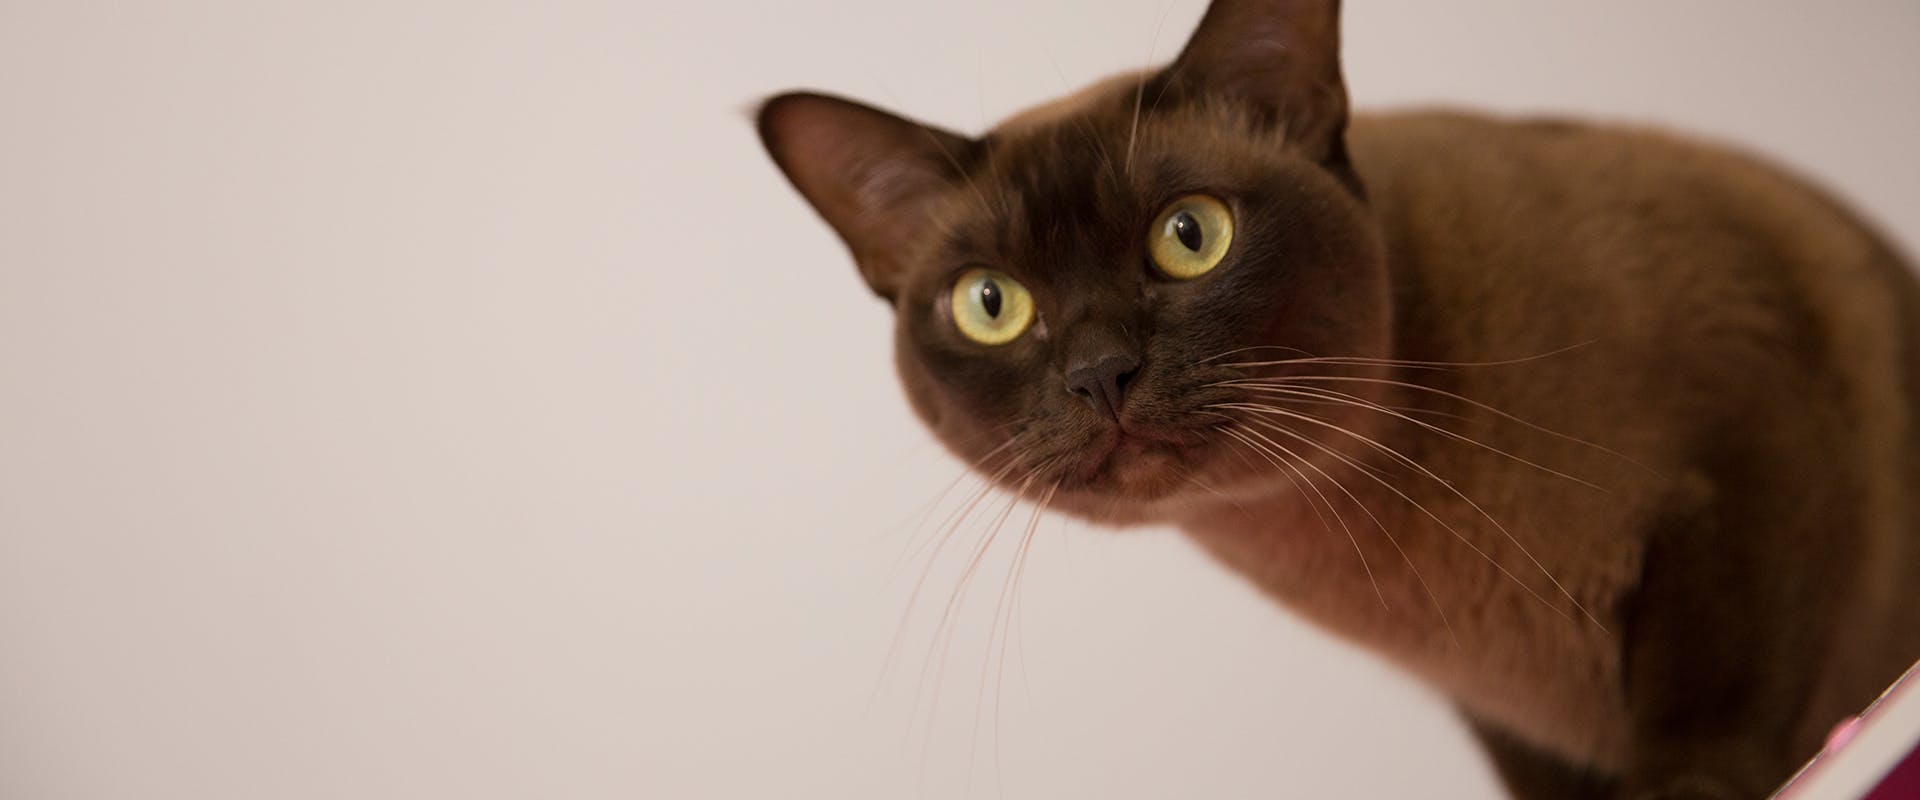 A cute and affectionate Burmese cat peering round a corner